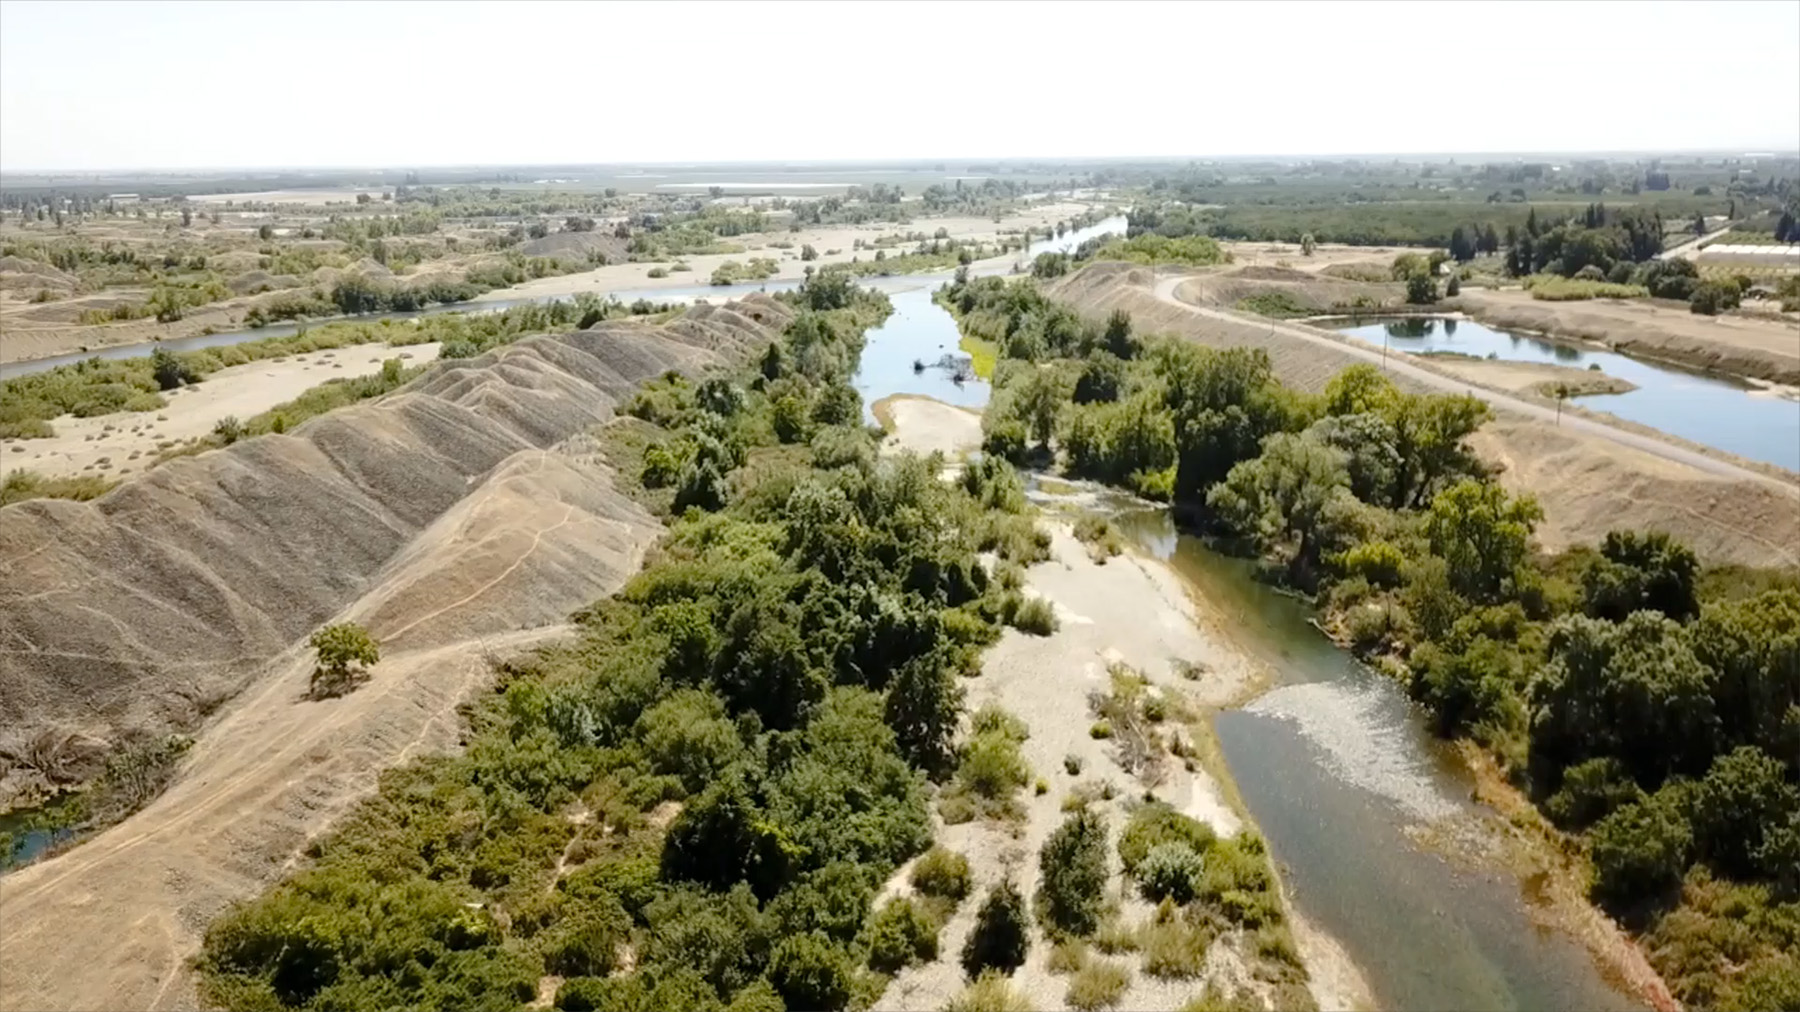 photograph showing land punctuated by meandering waterways and trees